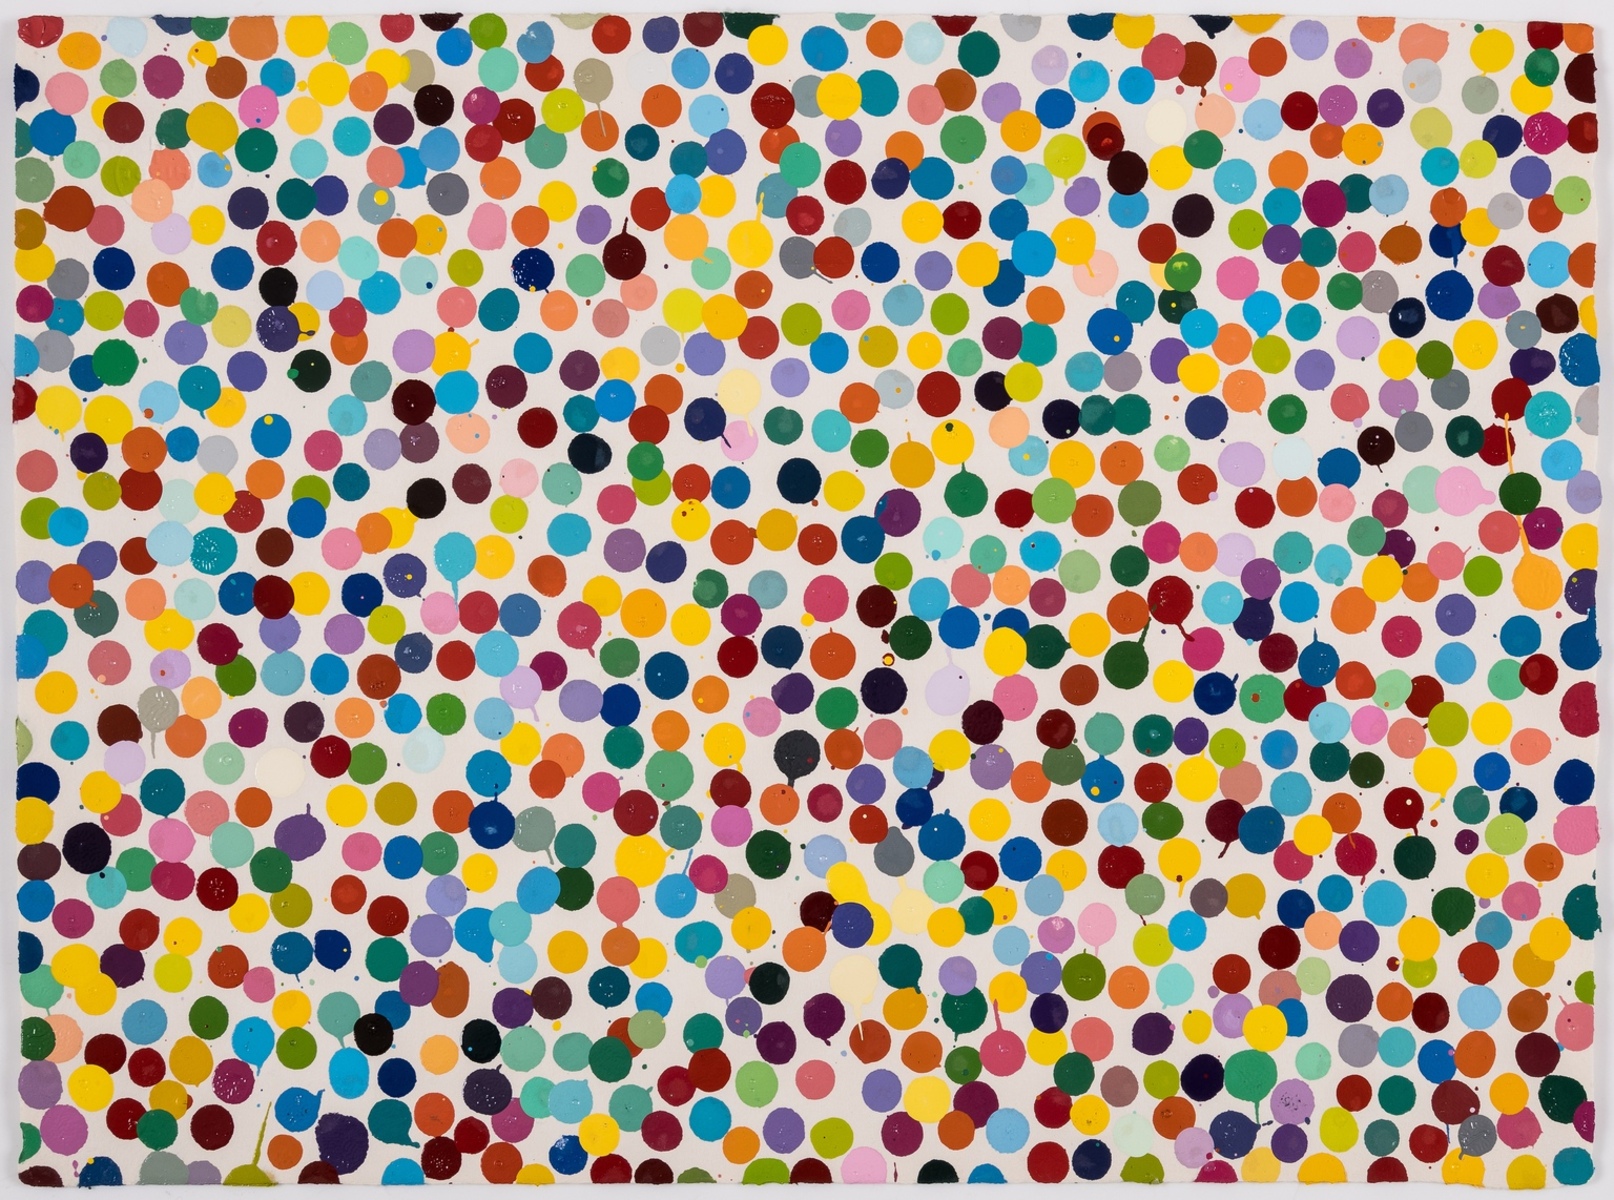 Damien Hirst (b. 1965) Until The Beast Dies, 2016, from The Currency